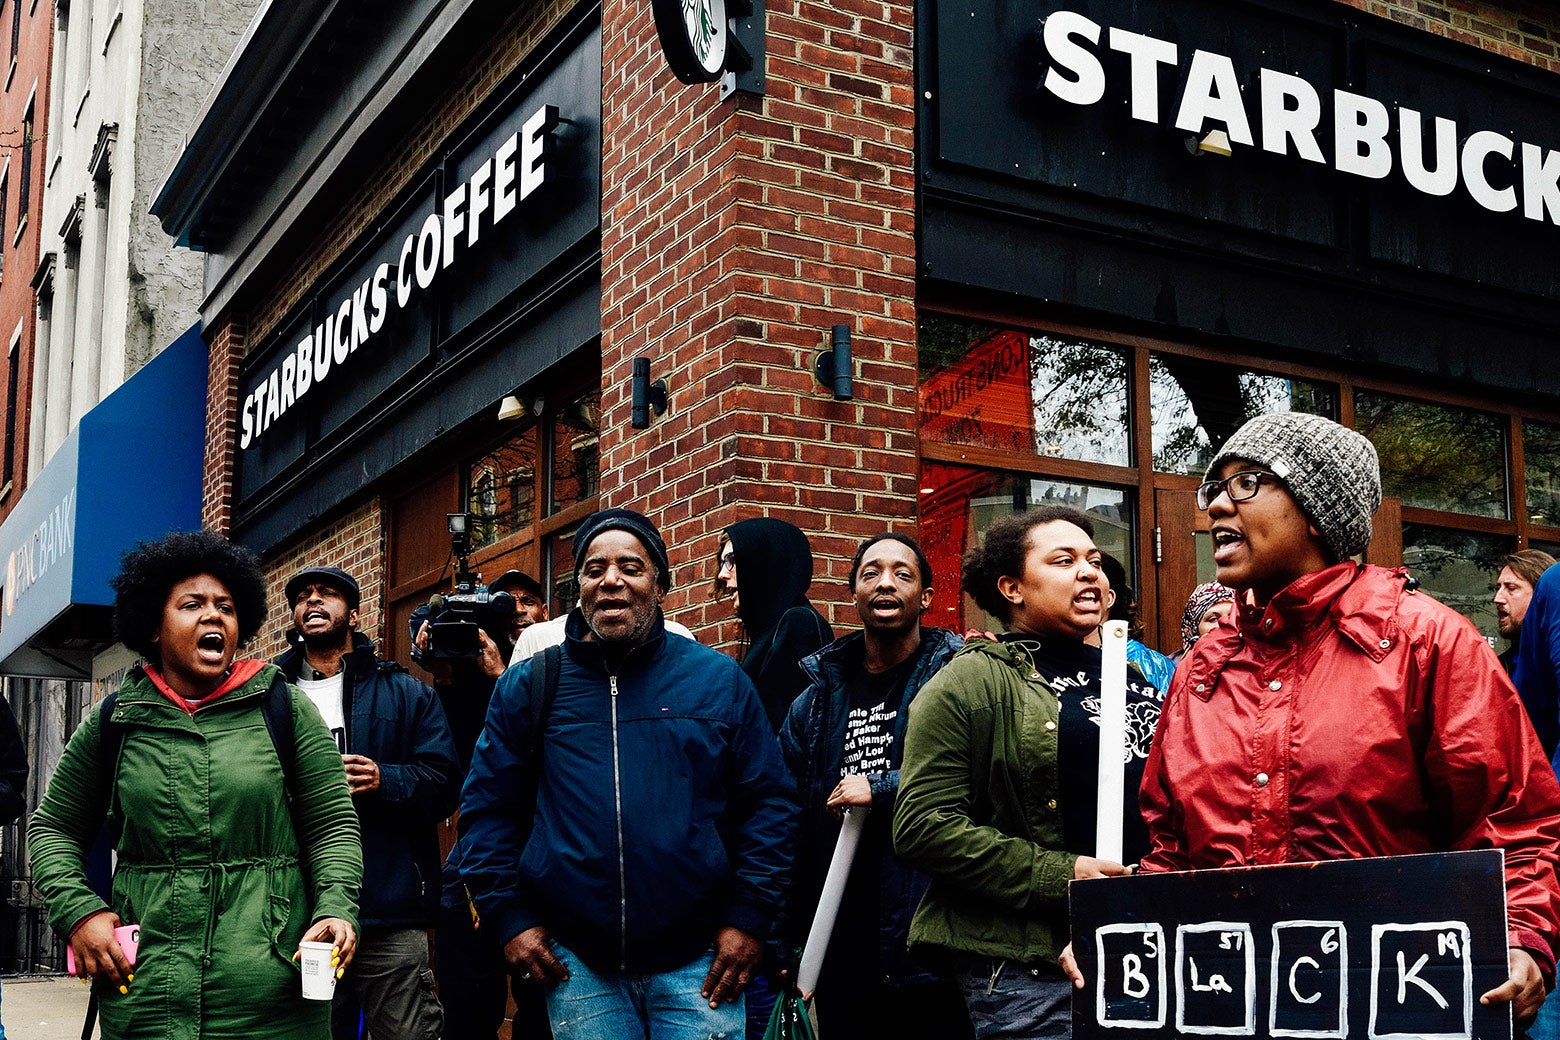 Protesters gather on Monday at the Starbucks location in Philadelphia where two black men were arrested.